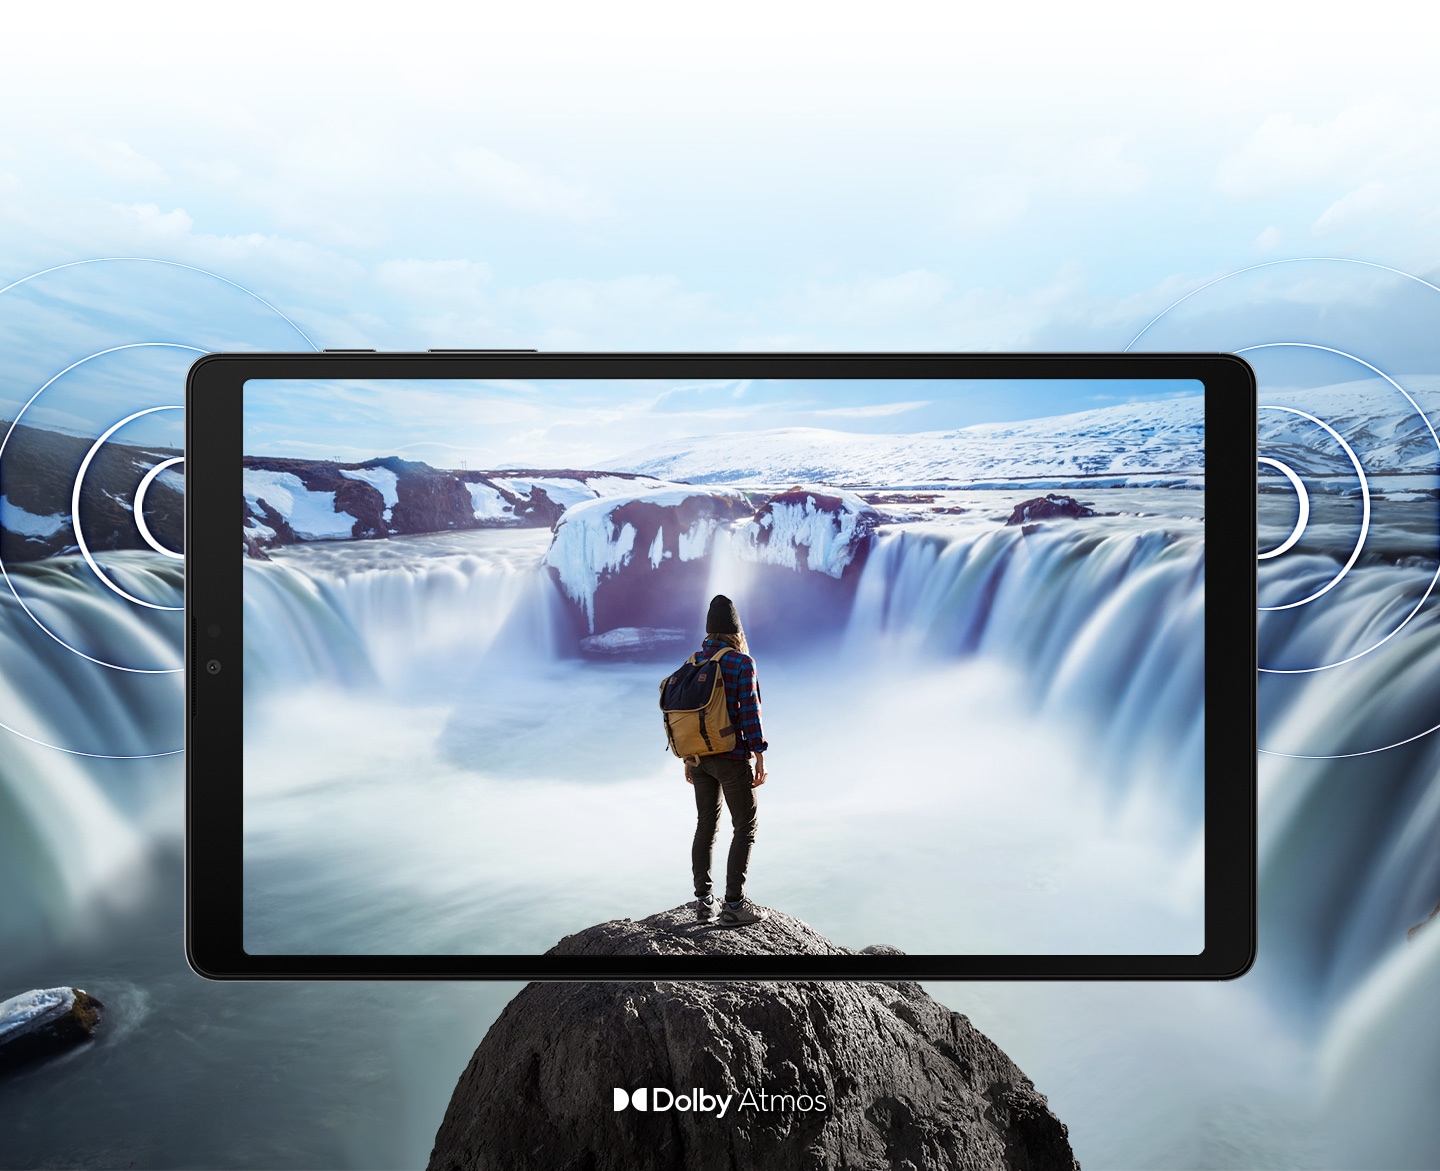 Galaxy A7 Lite seen from the front with an image of a person standing on a rock in front of steaming waterfalls on either side onscreen. The image expands past the edges of the tablet to show the expansiveness of the display. Rings come out from the sides to demonstrate the location of the dual speakers and the immersive sound of Dolby Atmos.